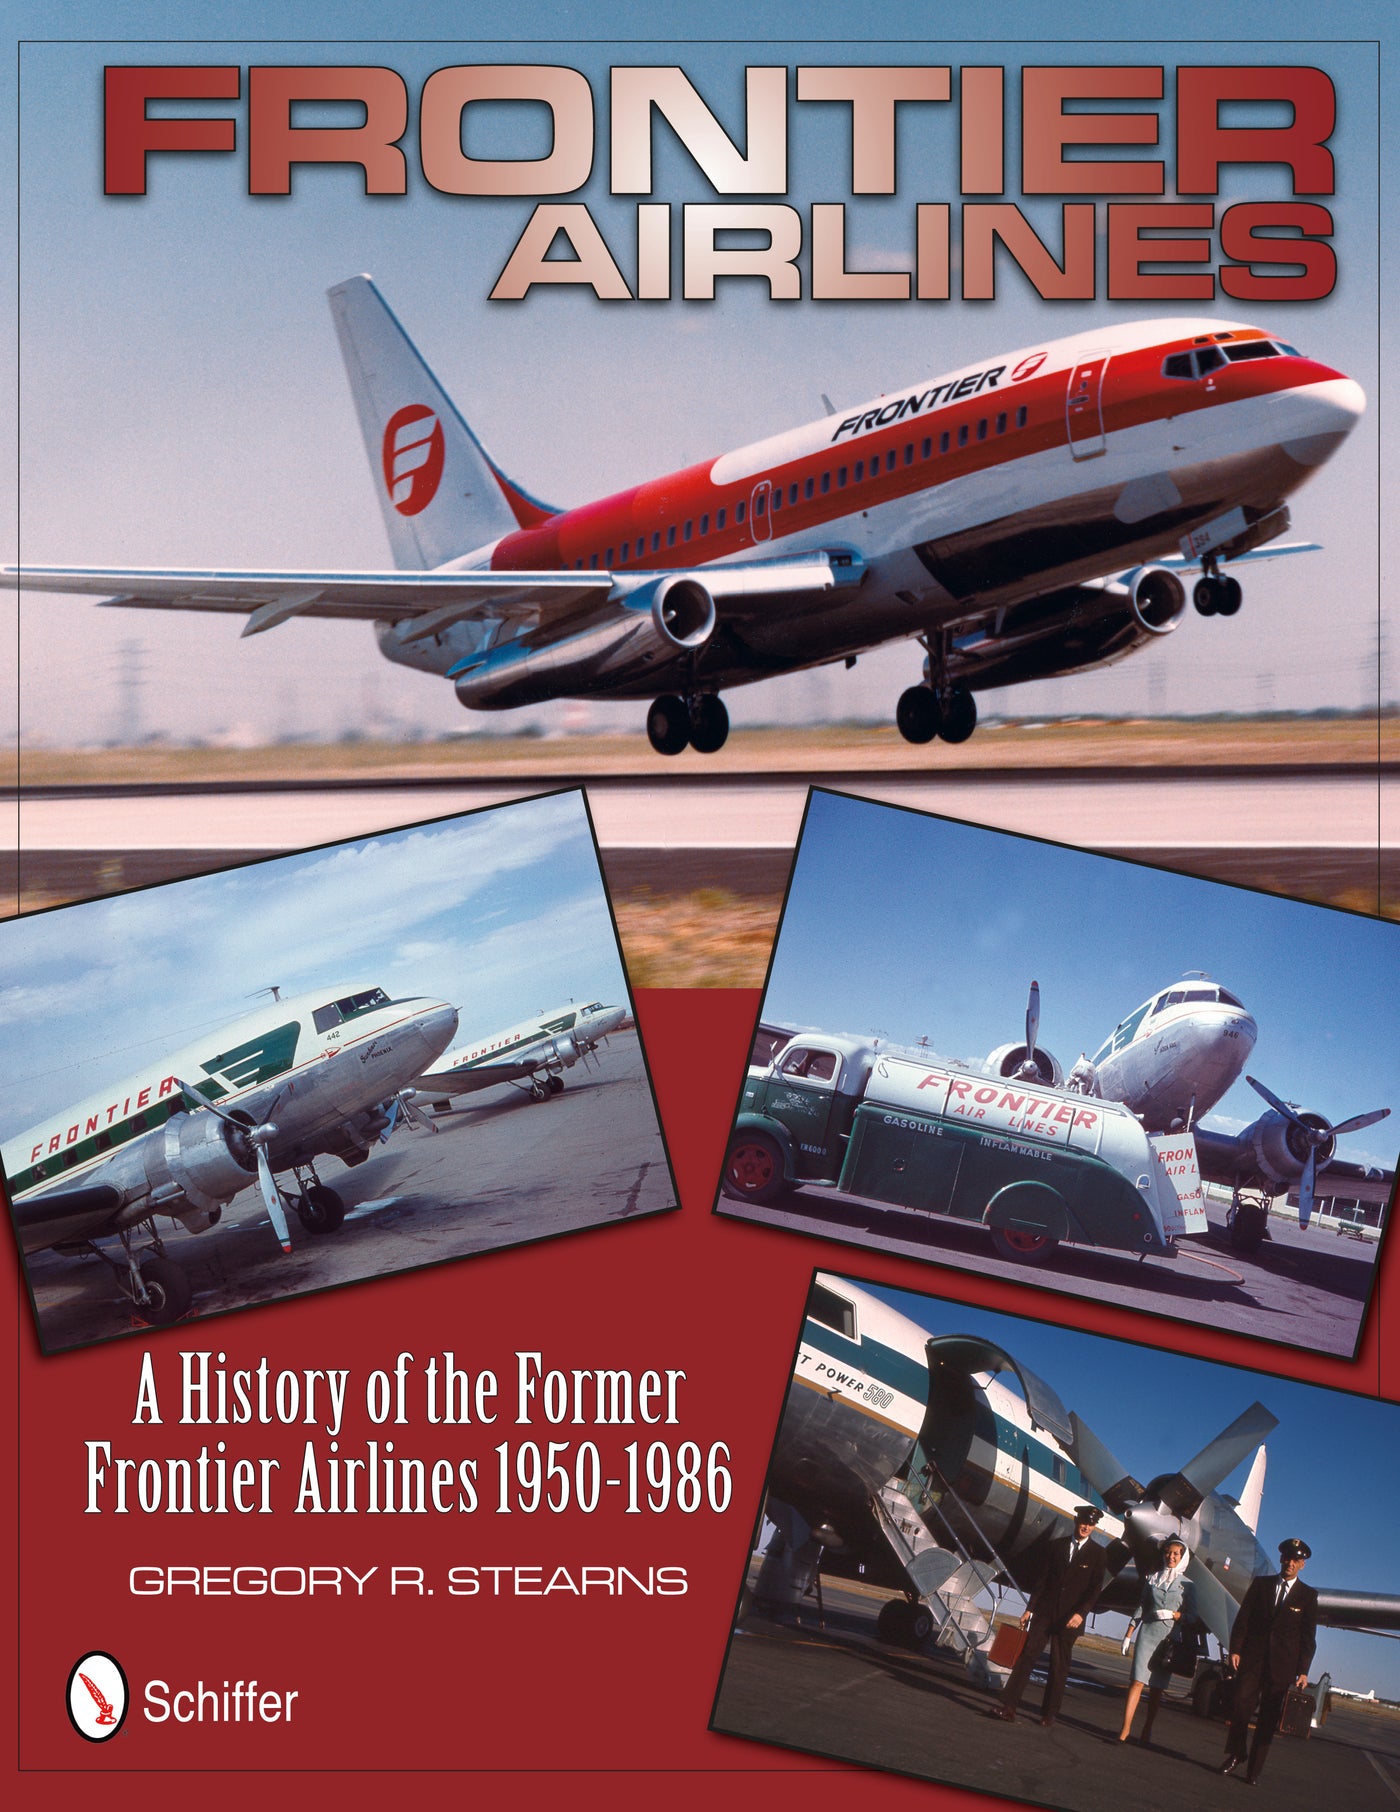 Frontier Airlines: A History of the Former Frontier Airlines